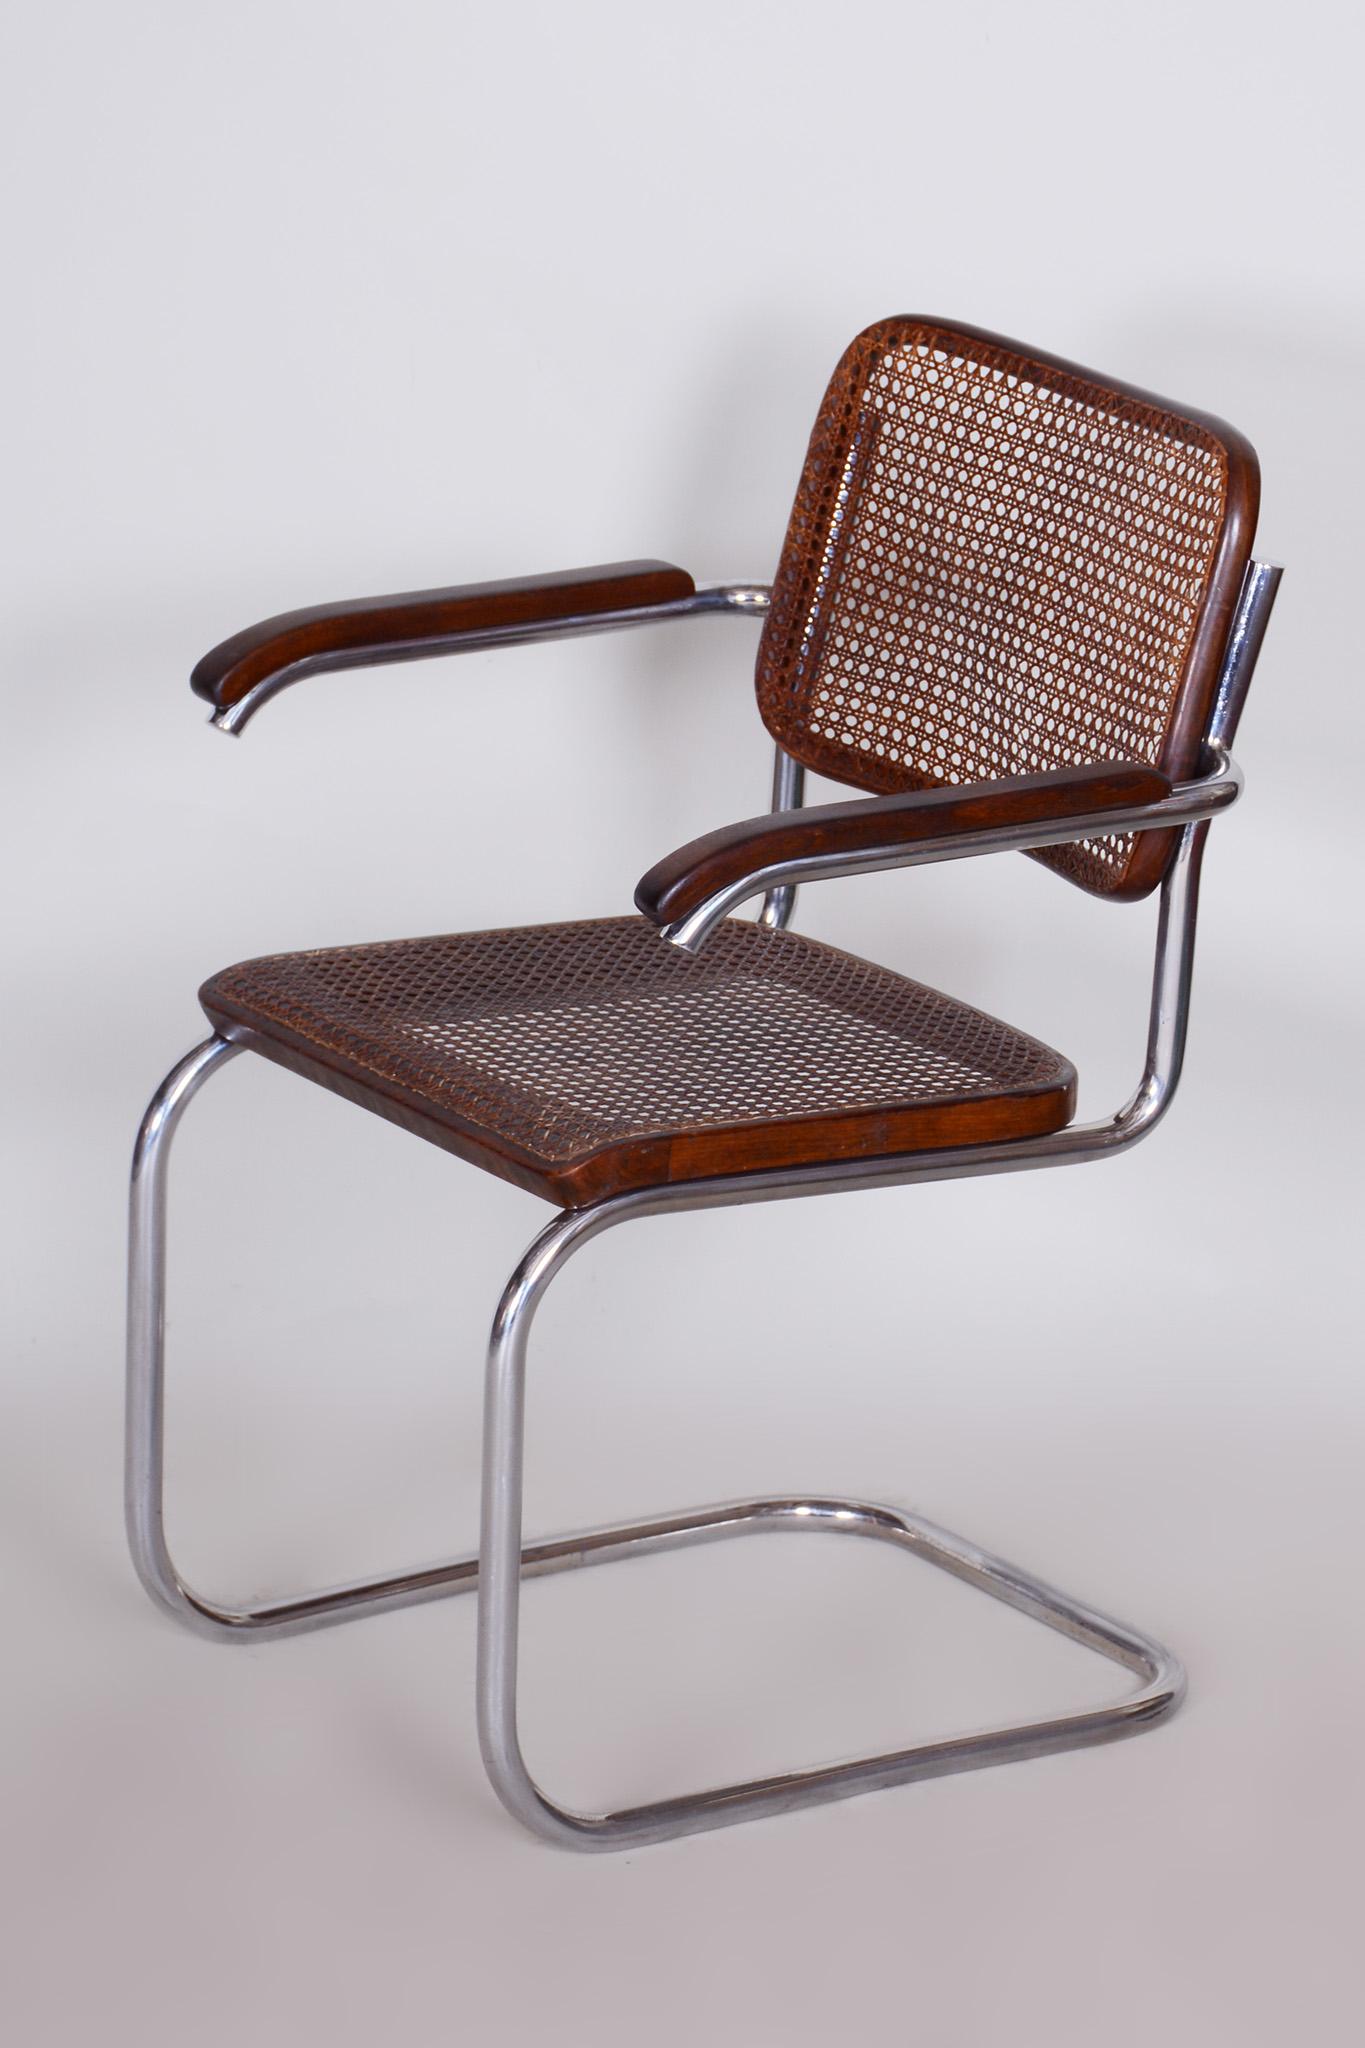 Restored Bauhaus Armchair, Marcel Breuer, Thonet, Beech, Chrome, Germany, 1930s In Good Condition For Sale In Horomerice, CZ